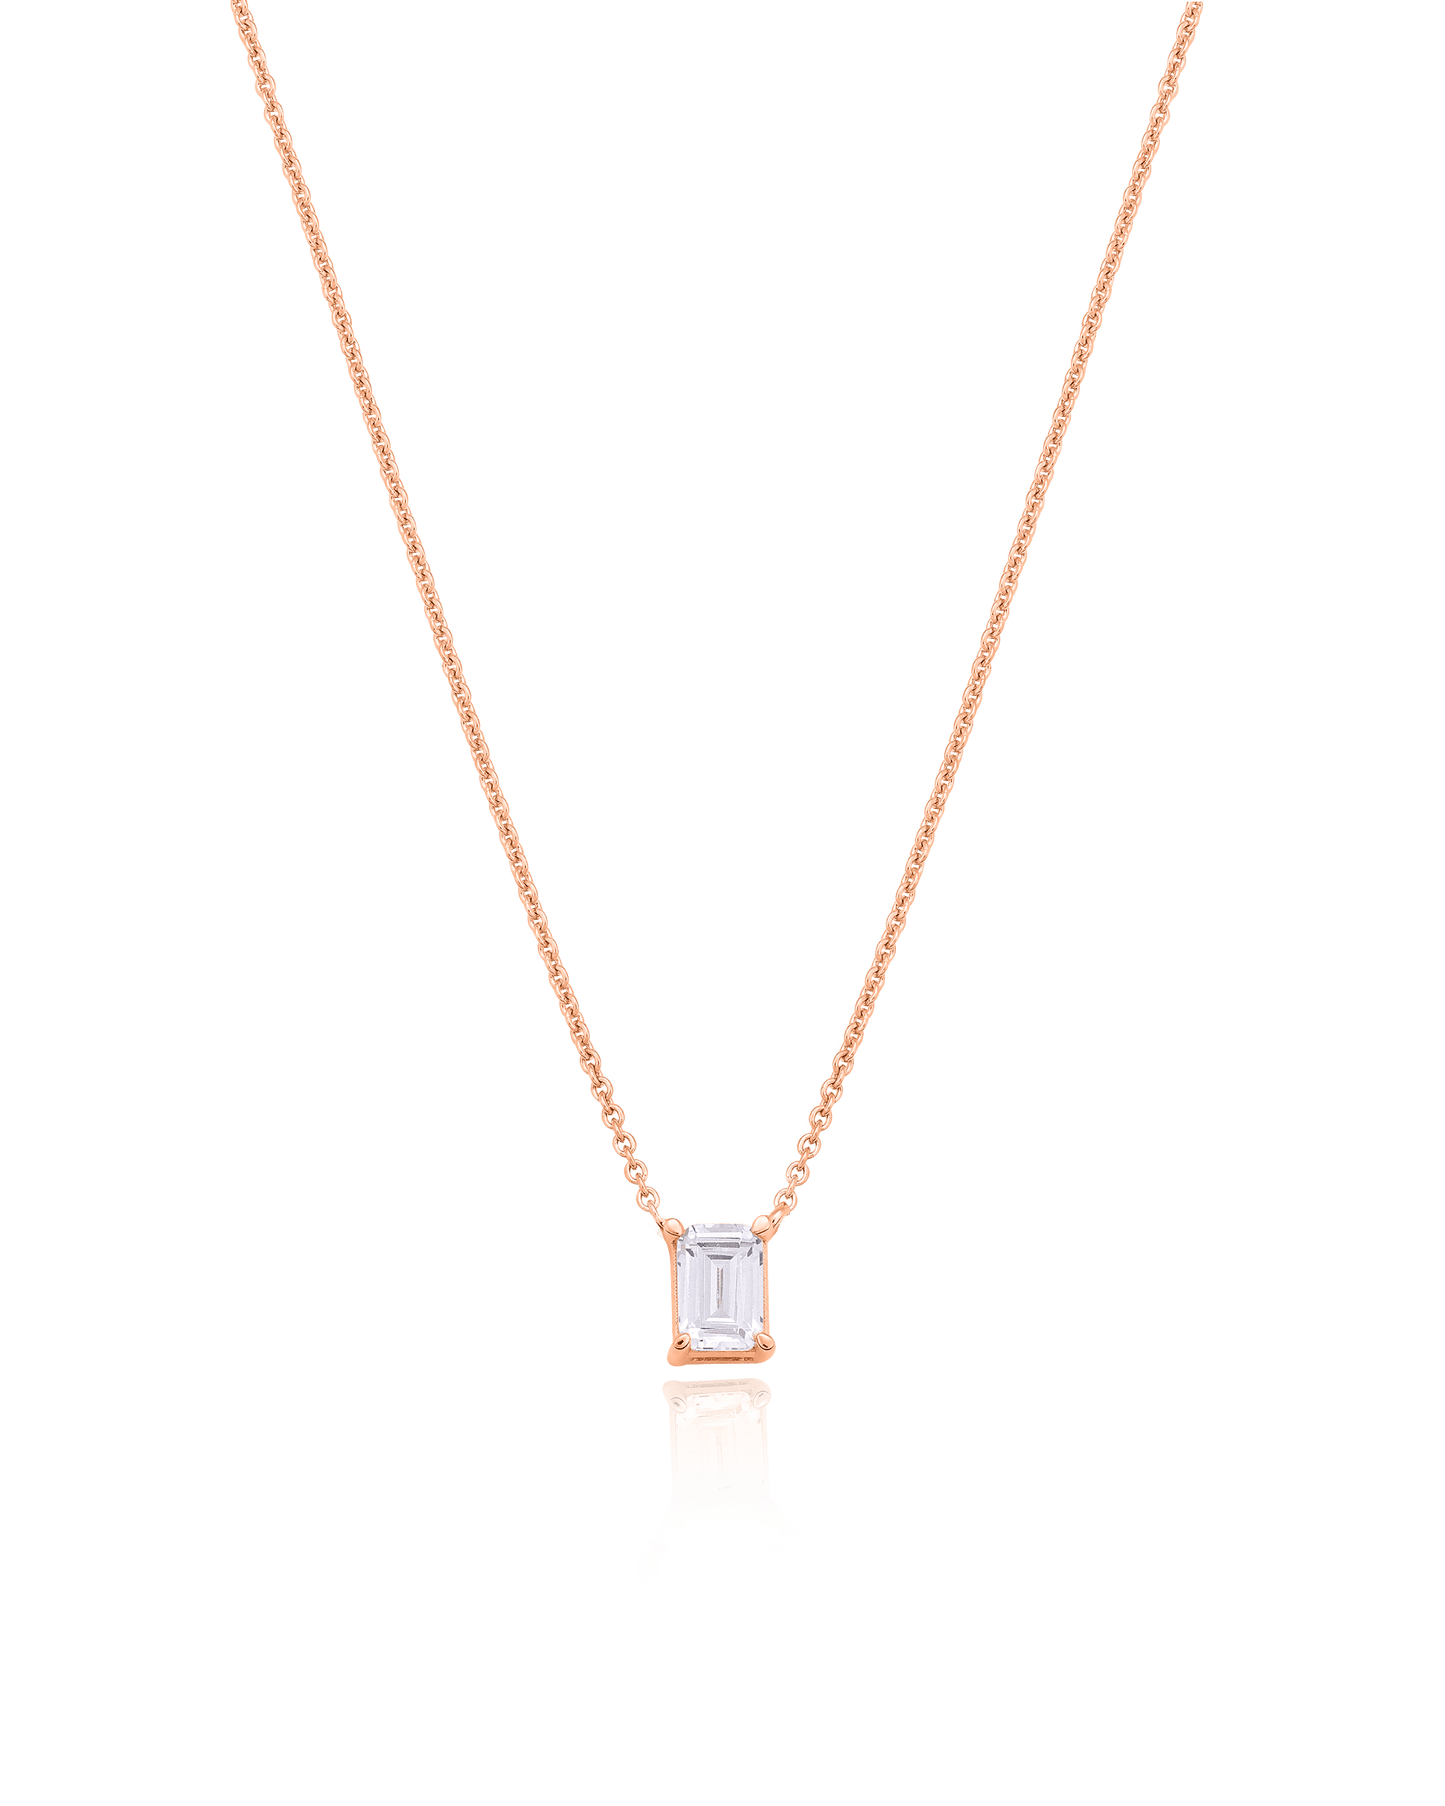 Emerald Solitaire Diamond Necklace - 14K Rose Gold Necklaces magal-dev 0.10 CT 16” 